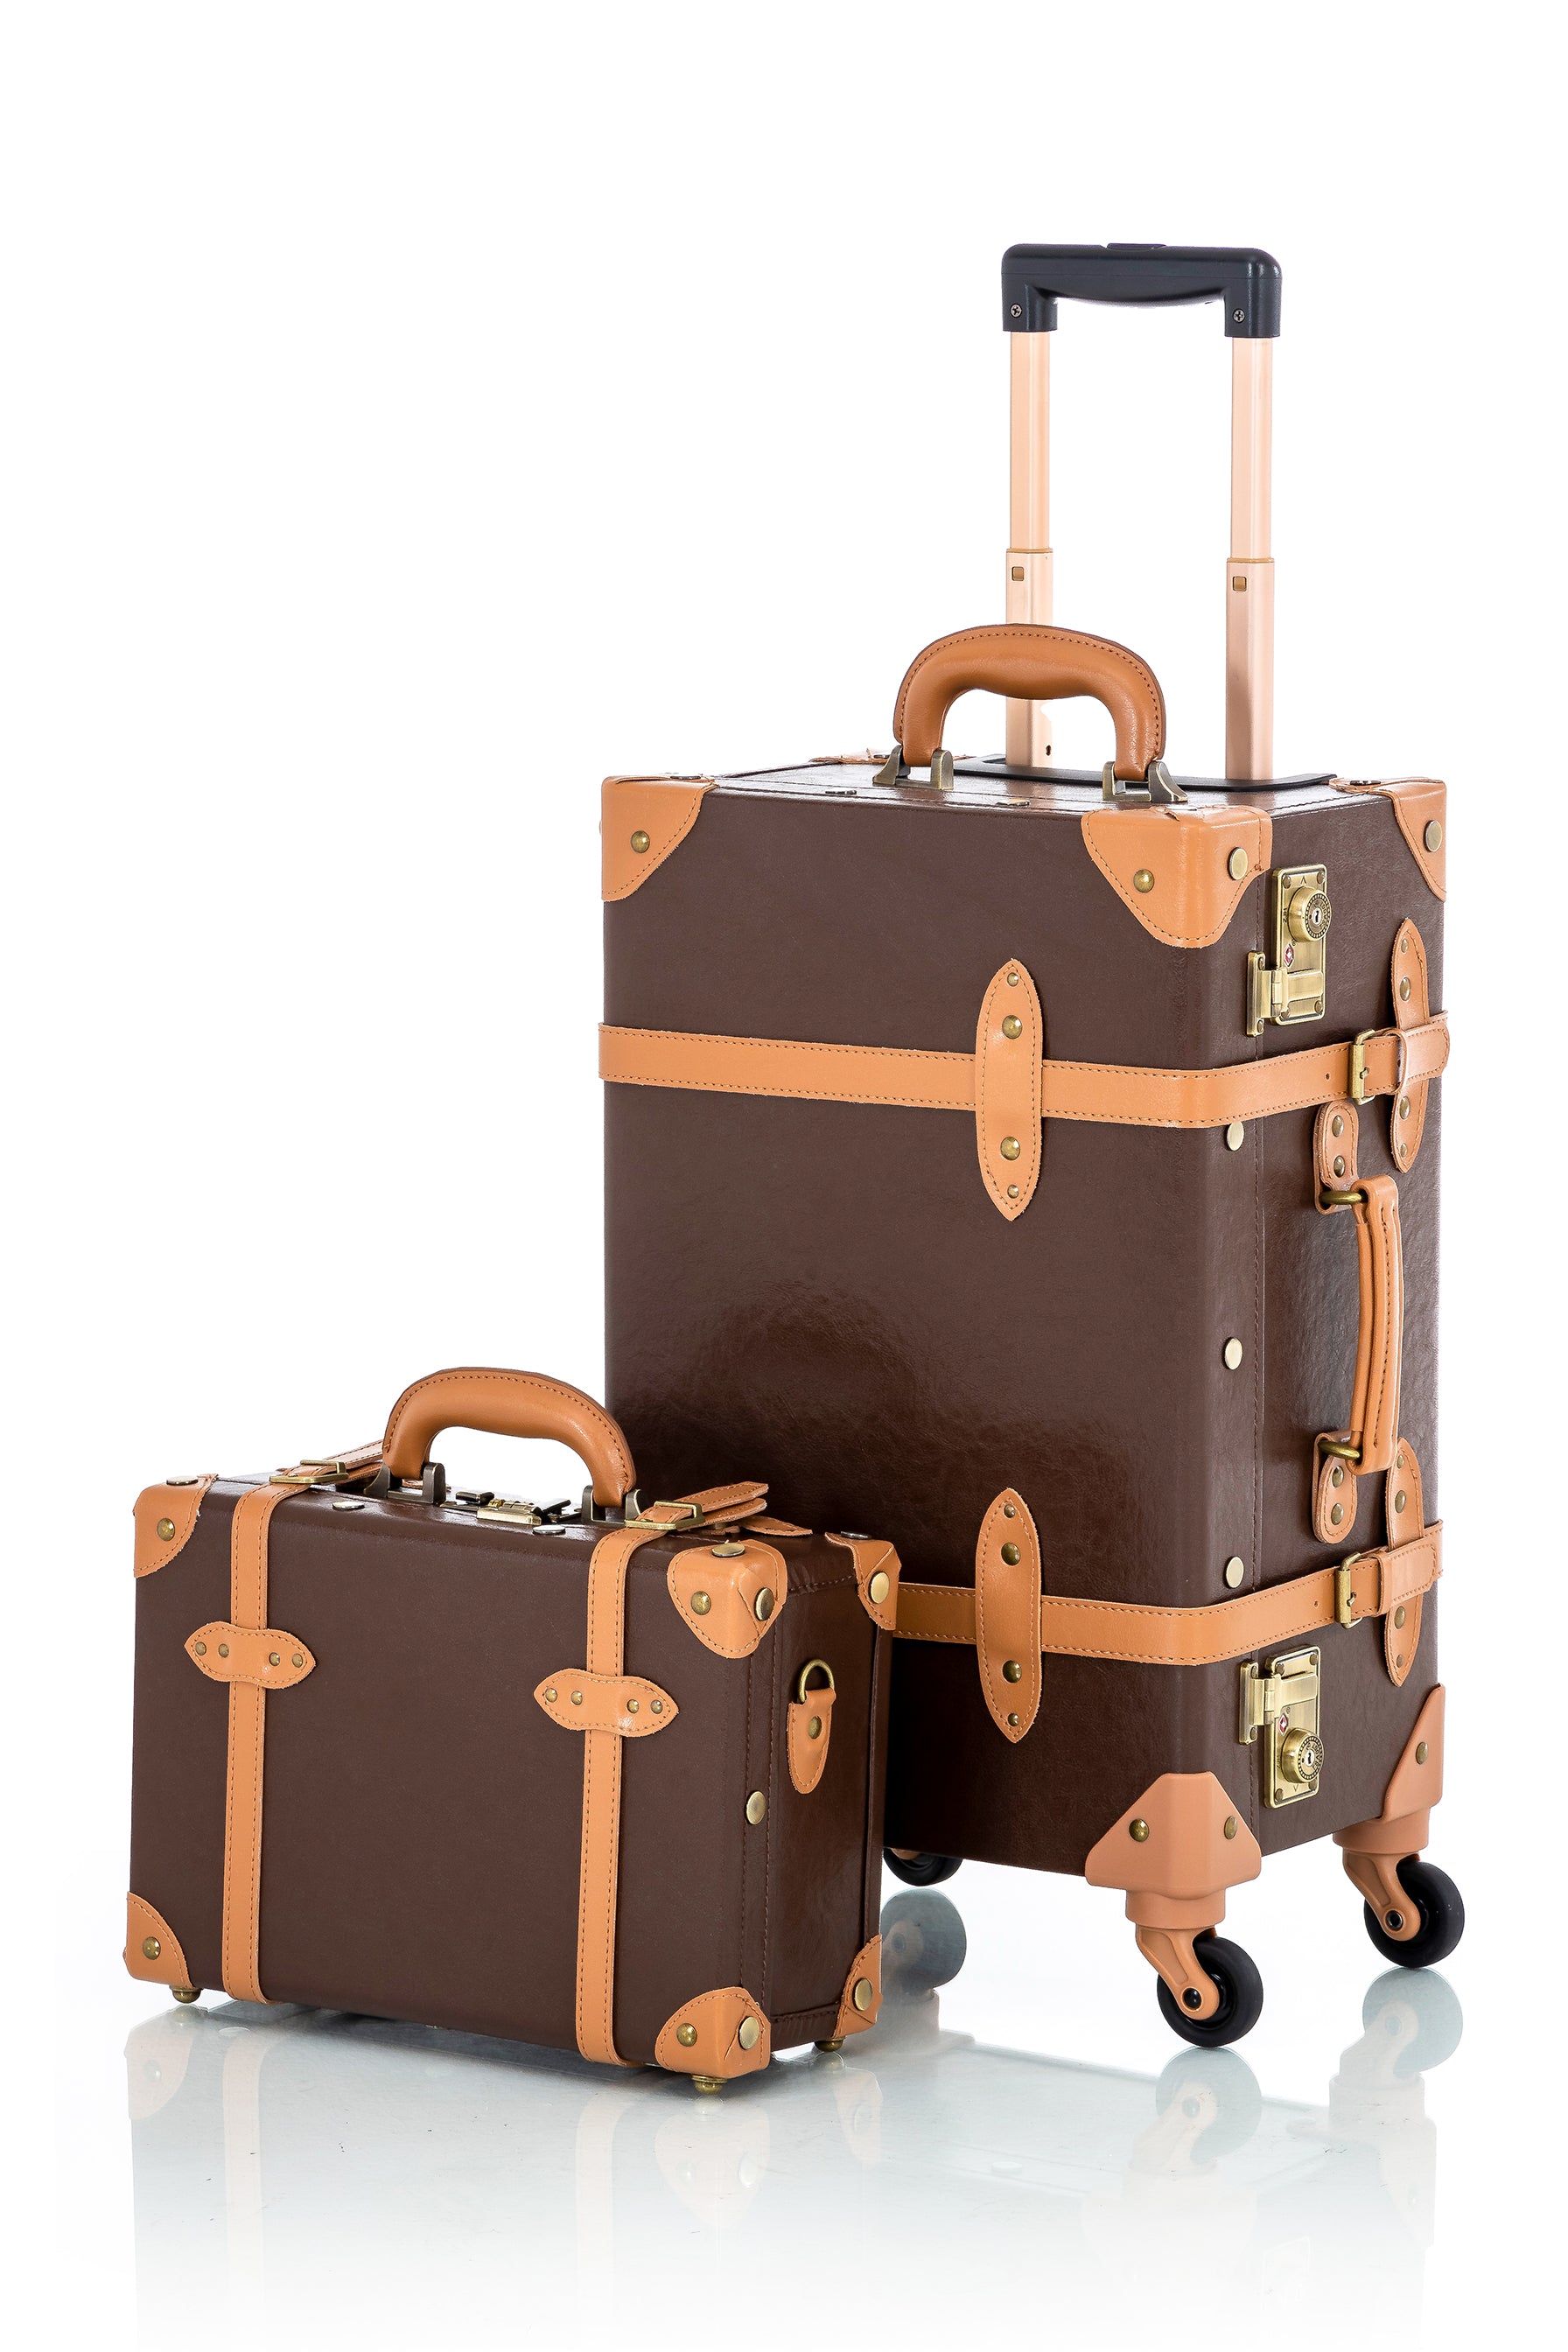 Minimalism 2 Pieces Luggage Set - Cocoa Brown's